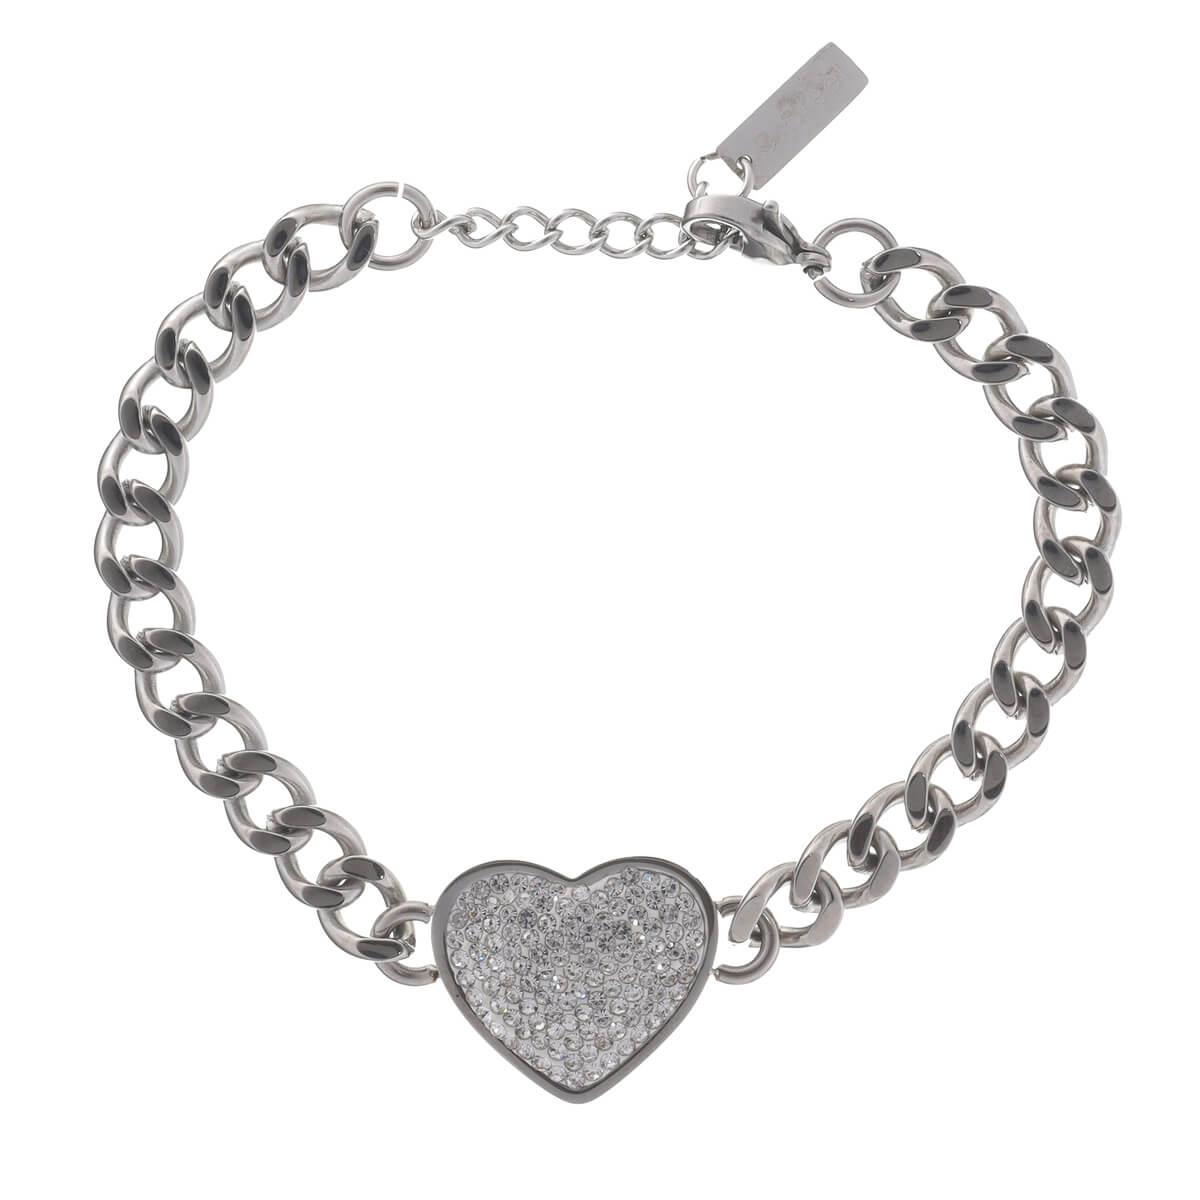 Heart bracelet with armoured chain (steel)